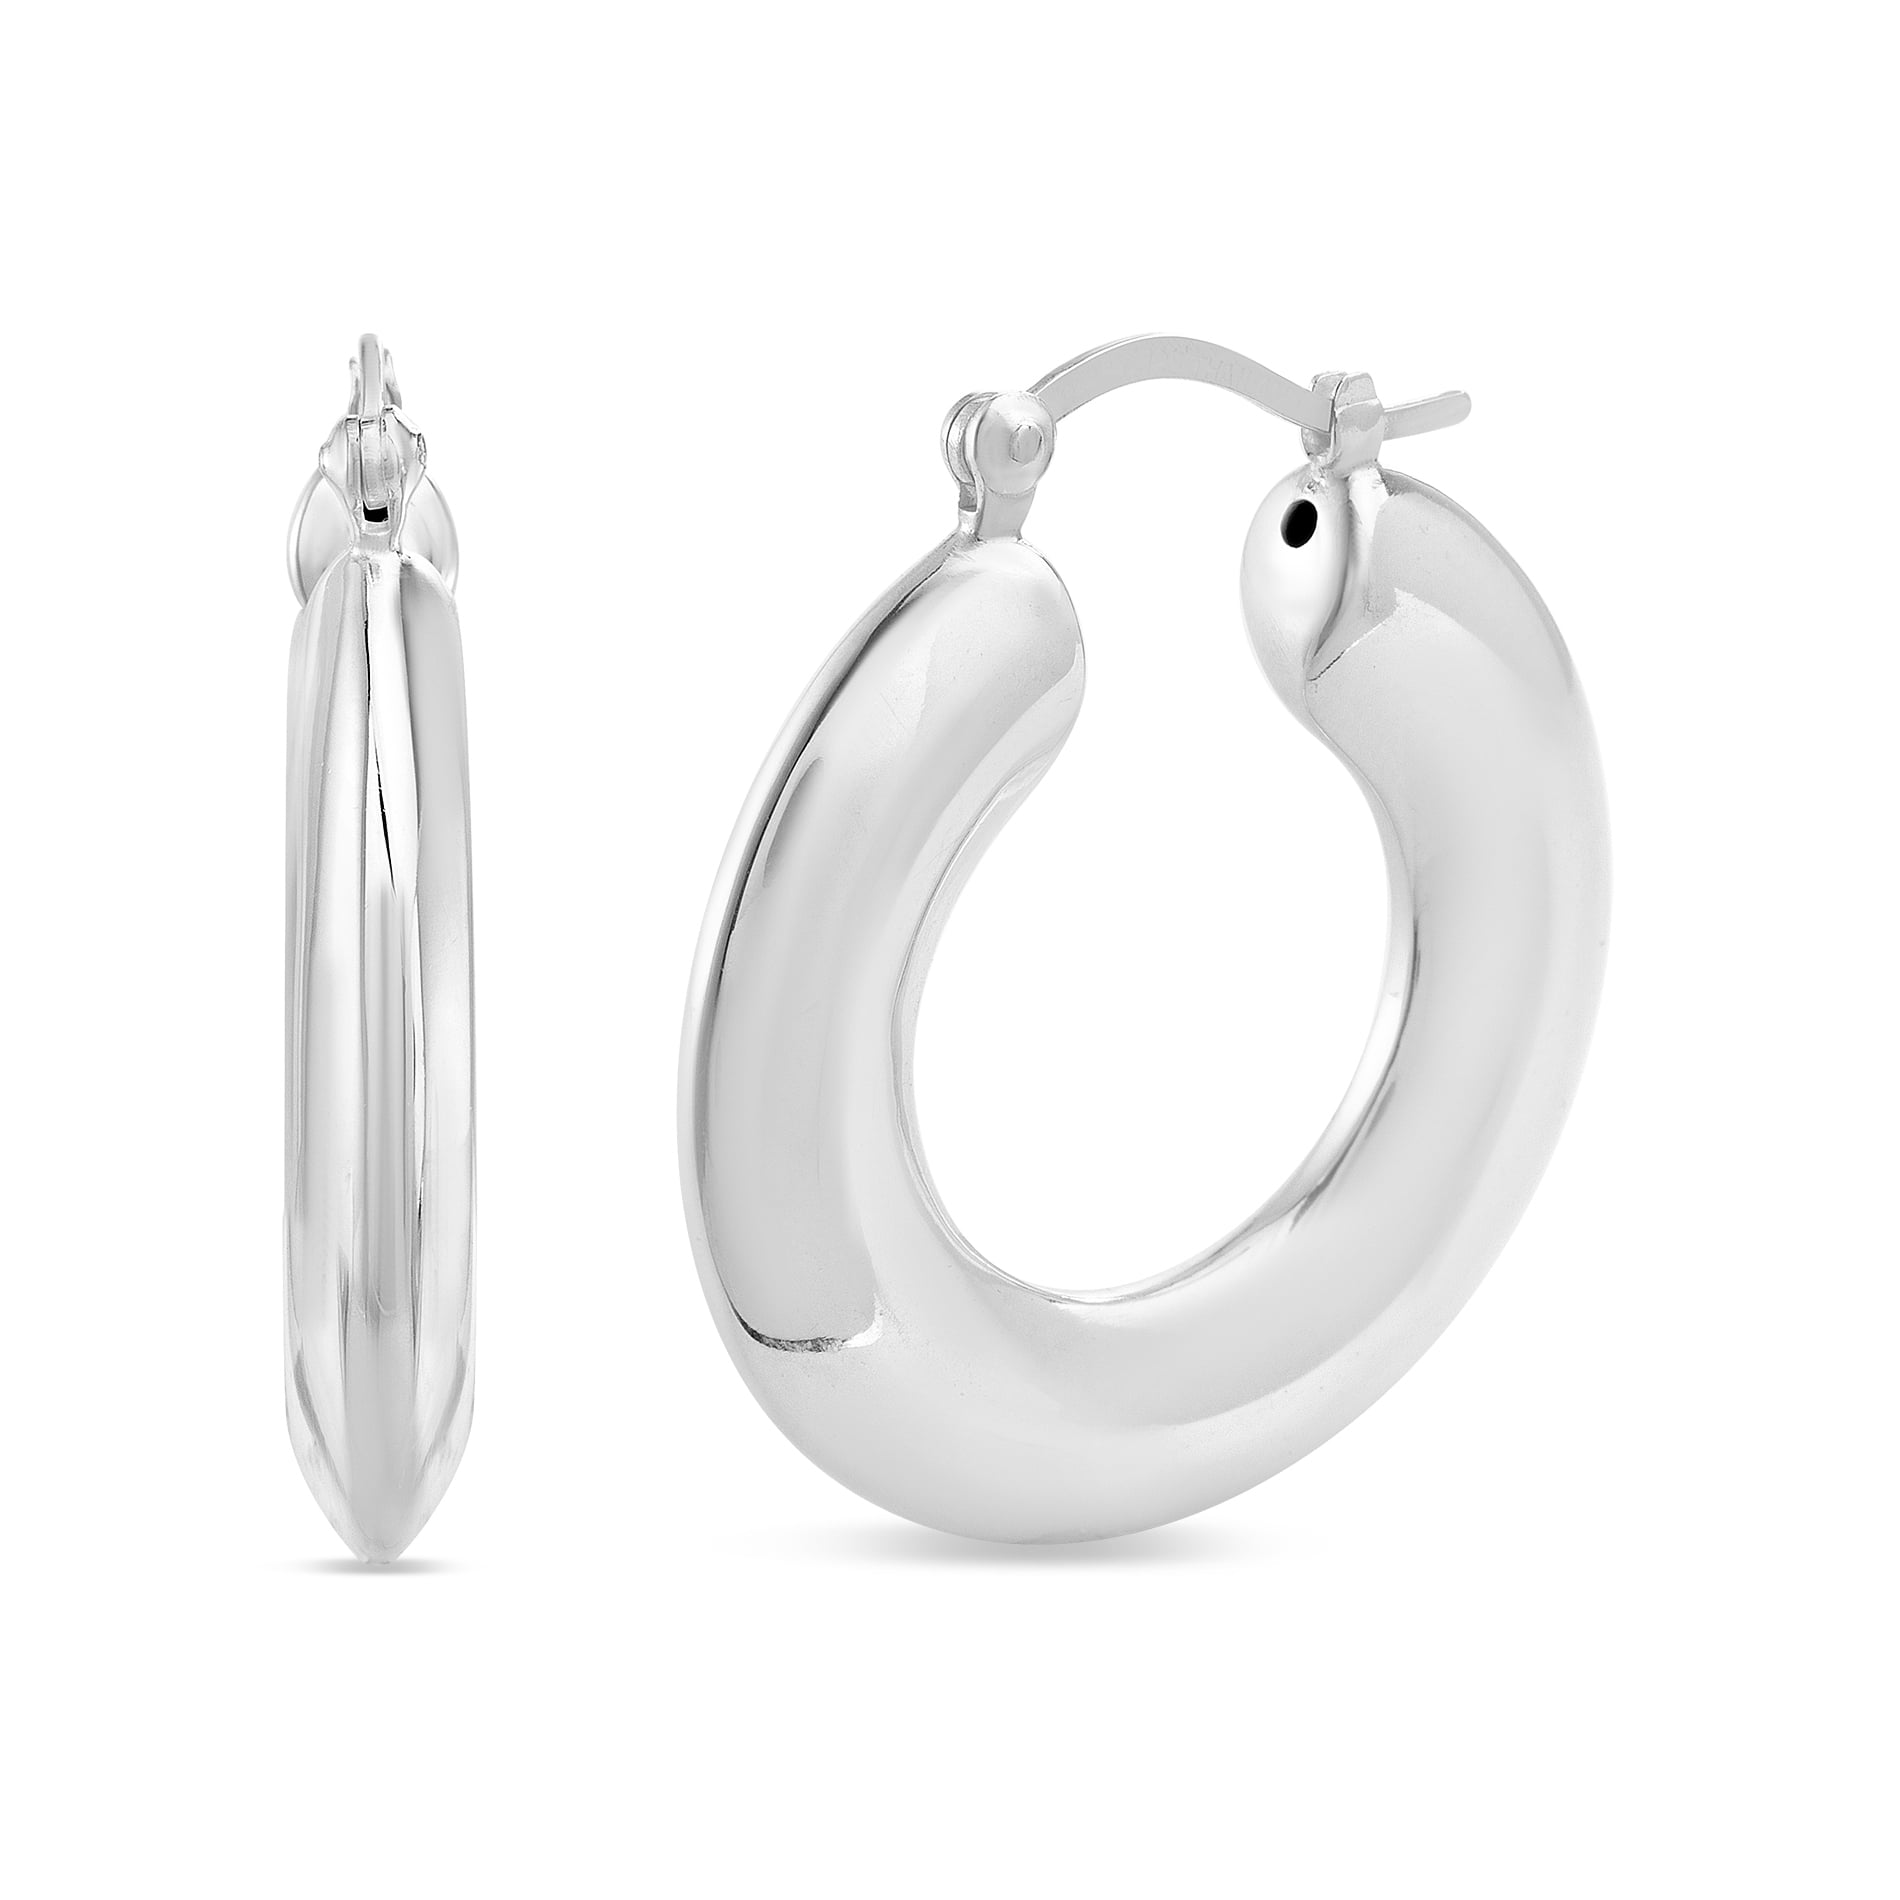 Sterling Silver Statement Earring Perfect Gift for Her 20 mm Oval Hoop Earrings Chunky Earrings